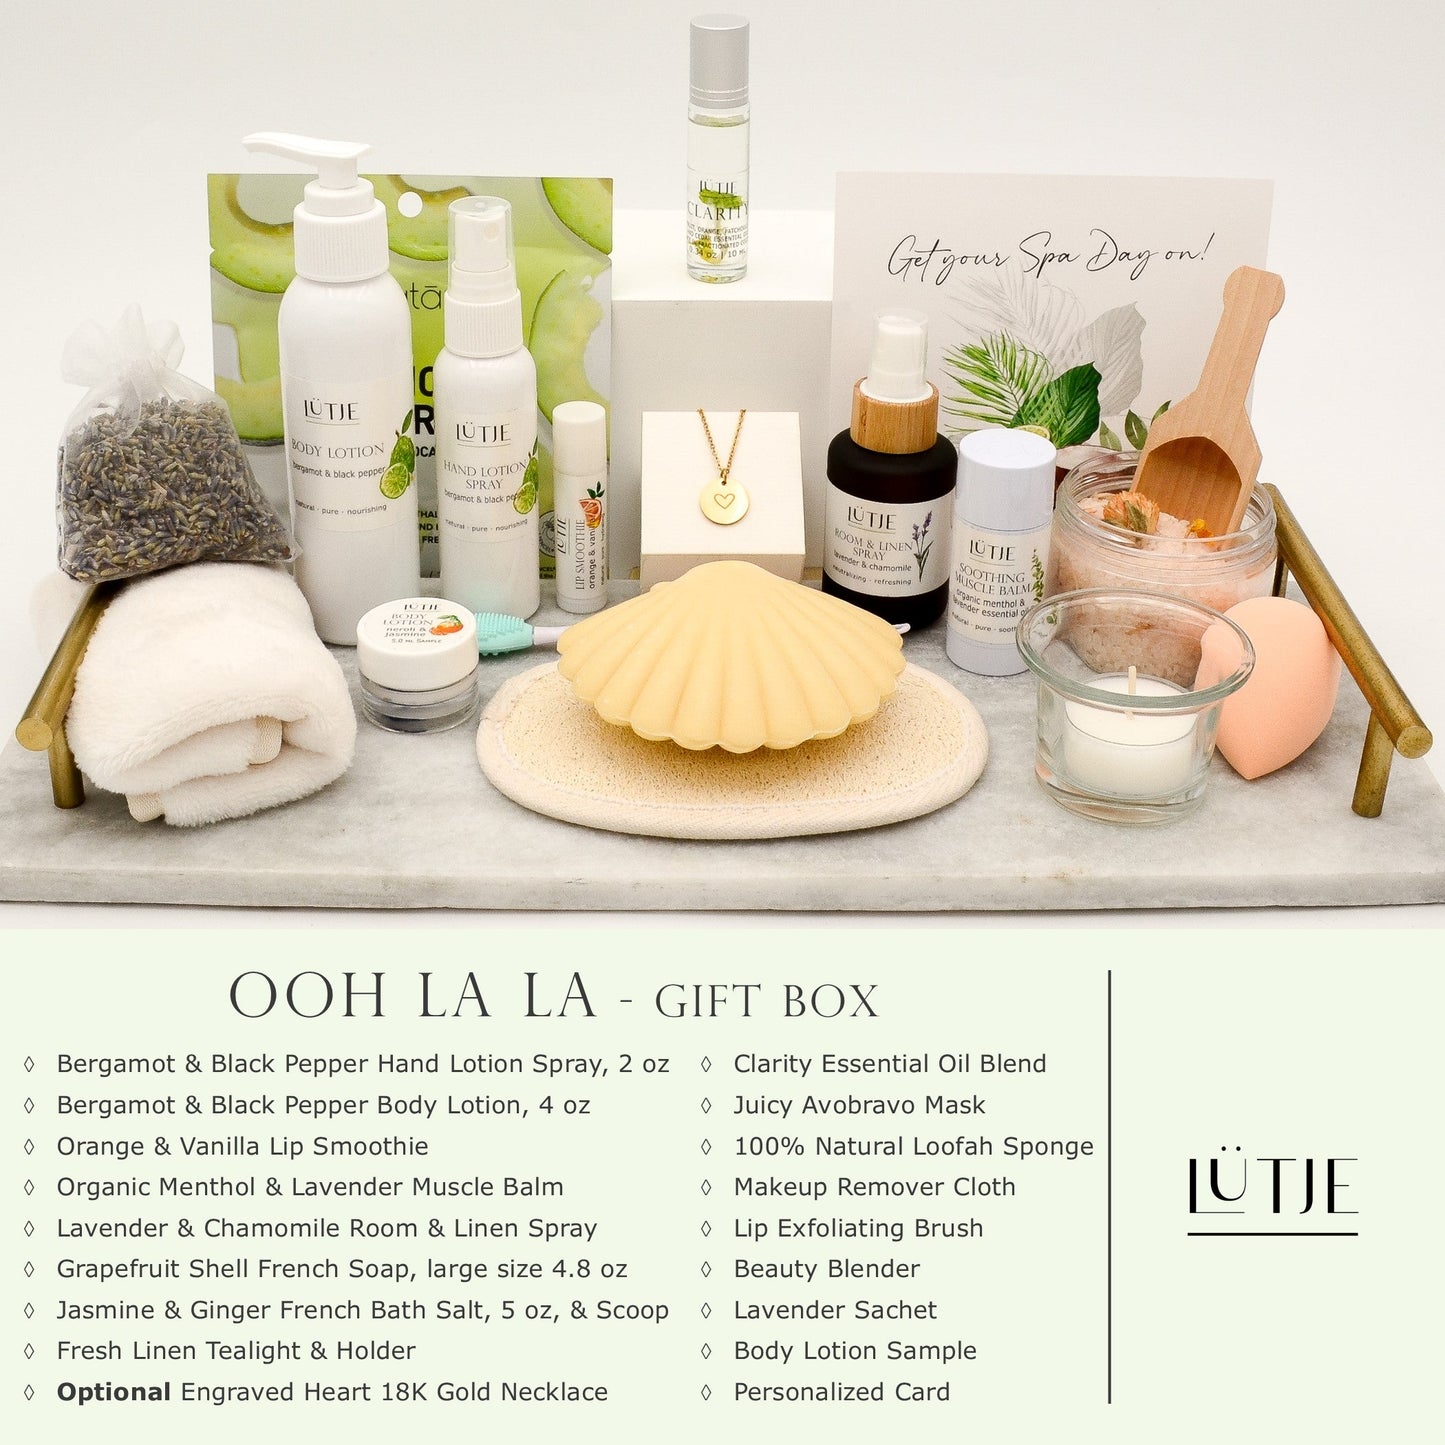 Ooh La La Gift Box for women, wife, daughter, BFF, sister, mom, or grandma, includes Bergamot & Black Pepper hand lotion spray and body lotion, essential oil, lip balm, soothing muscle balm, Lavender & Chamomile room & linen spray, French soap, French bath salts, hydrating face mask, other bath, spa and self-care items, and optional 18K gold-plated necklace with engraved heart.